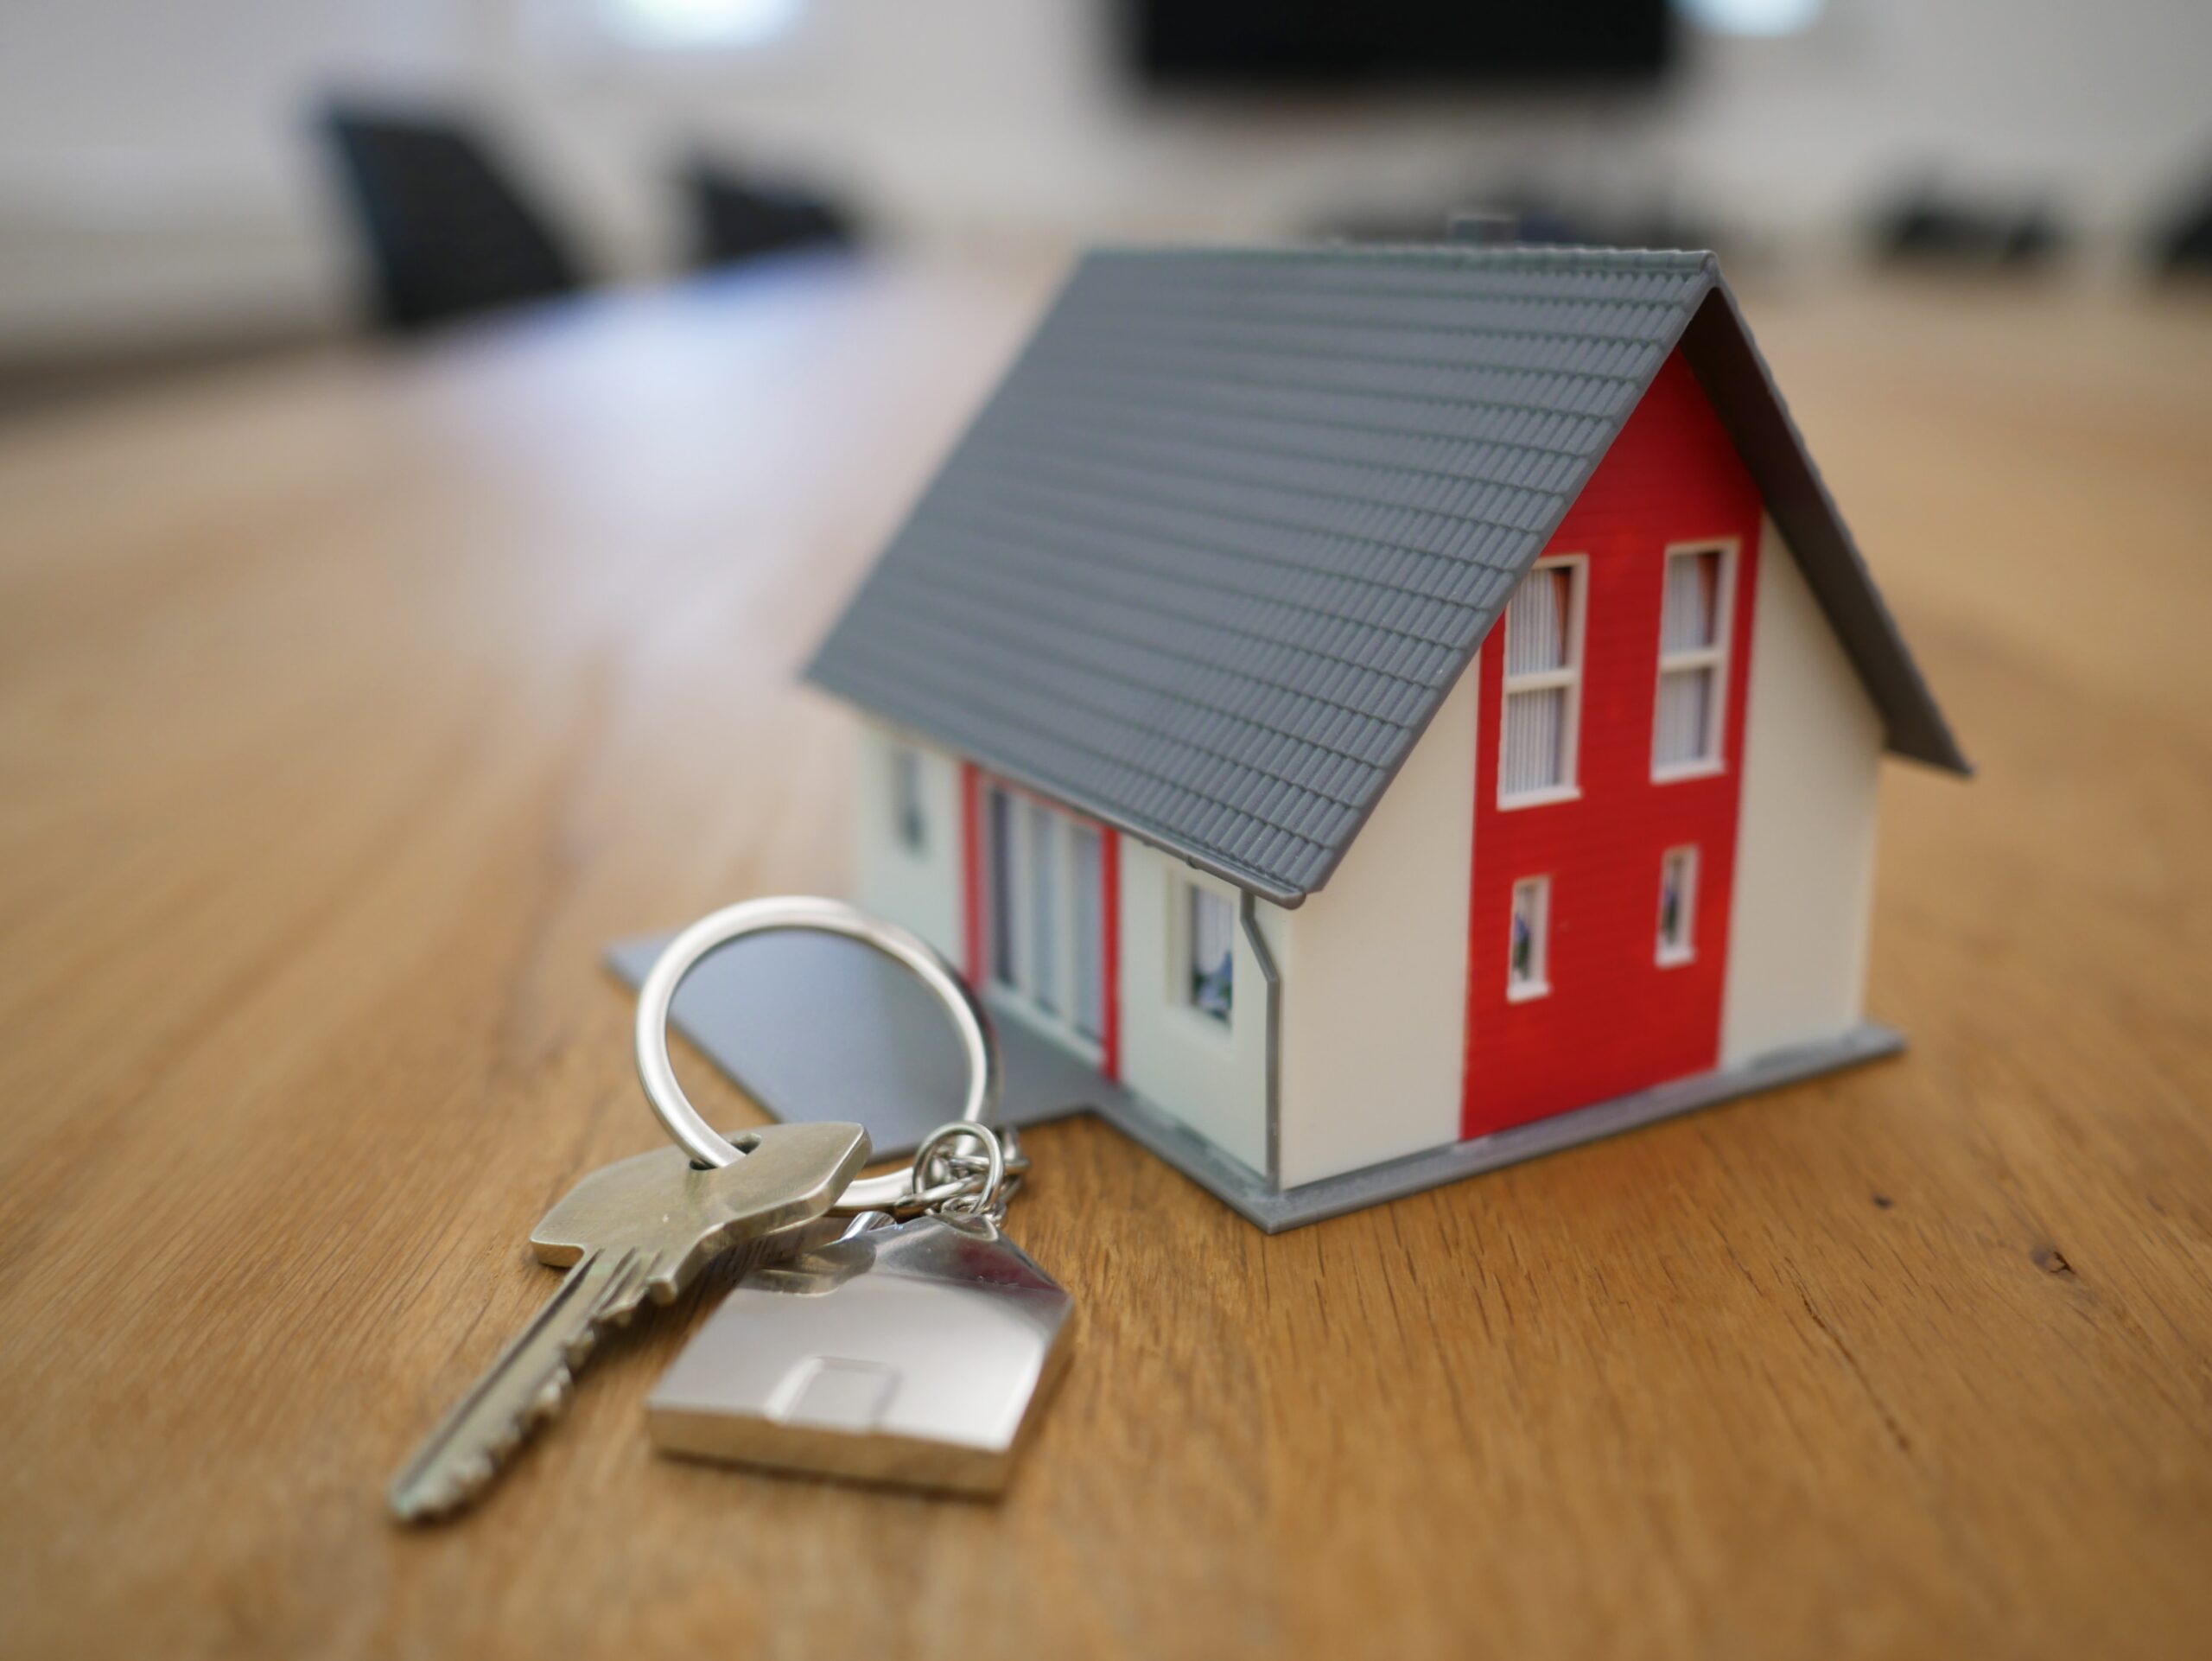 picture of a key and a miniature house